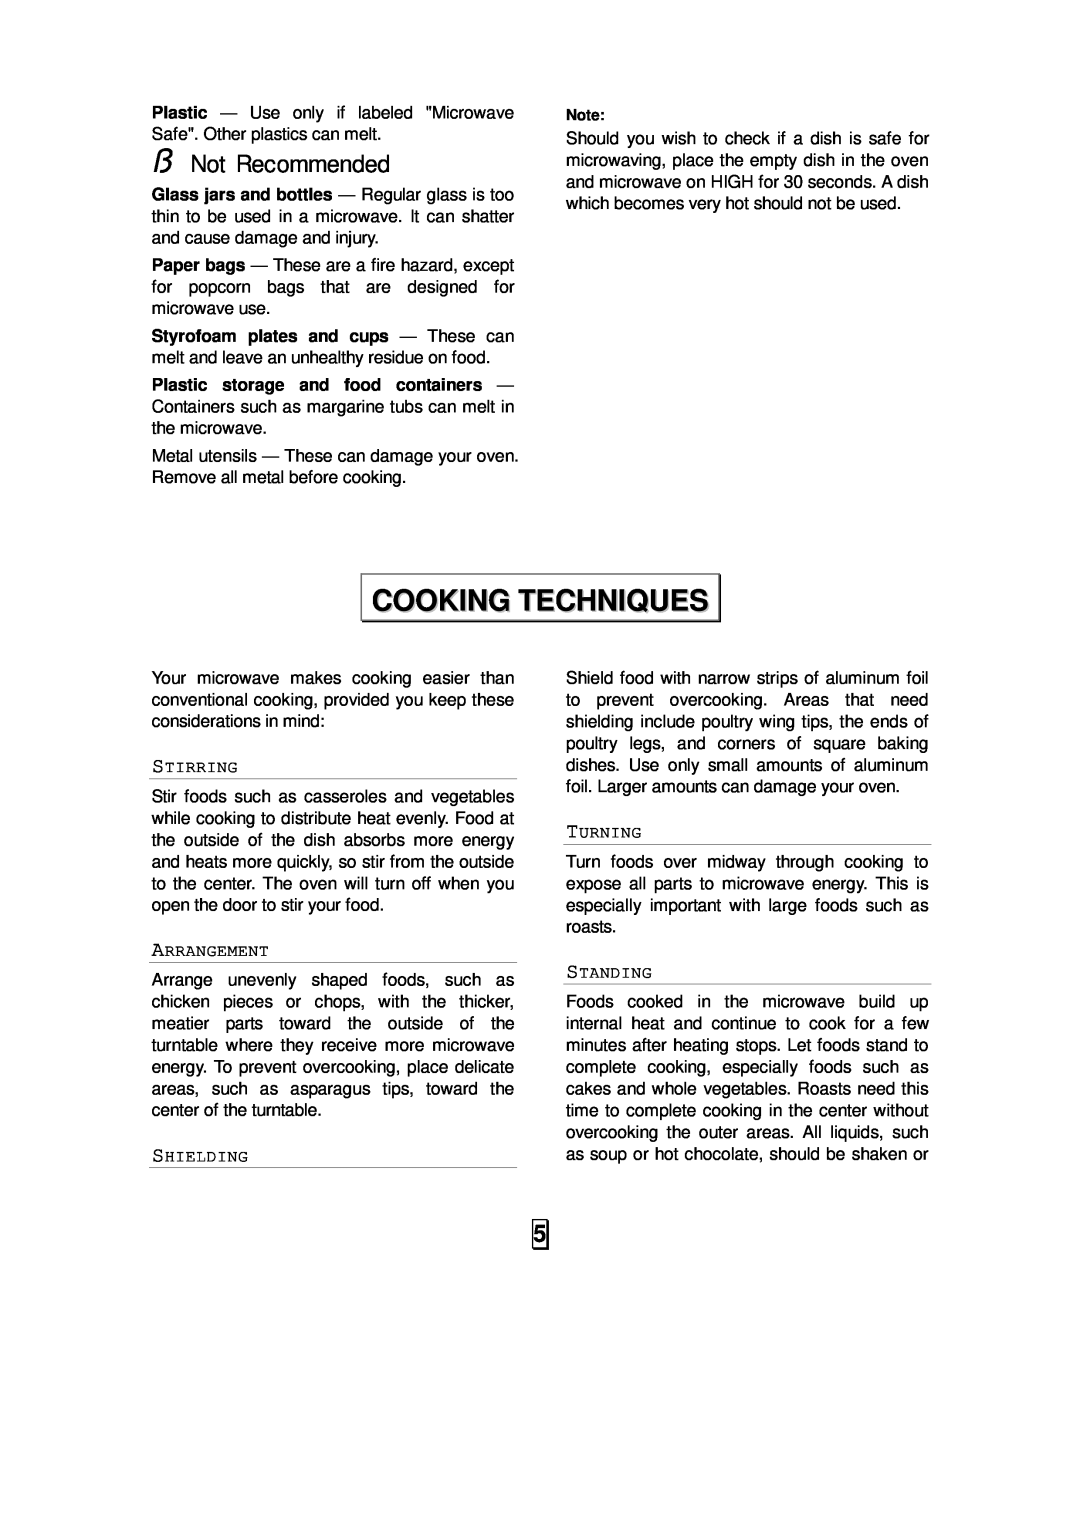 Oster OMW991 owner manual Cooking Techniques, û Not Recommended, Stirring, Arrangement, Shielding, Turning, Standing 